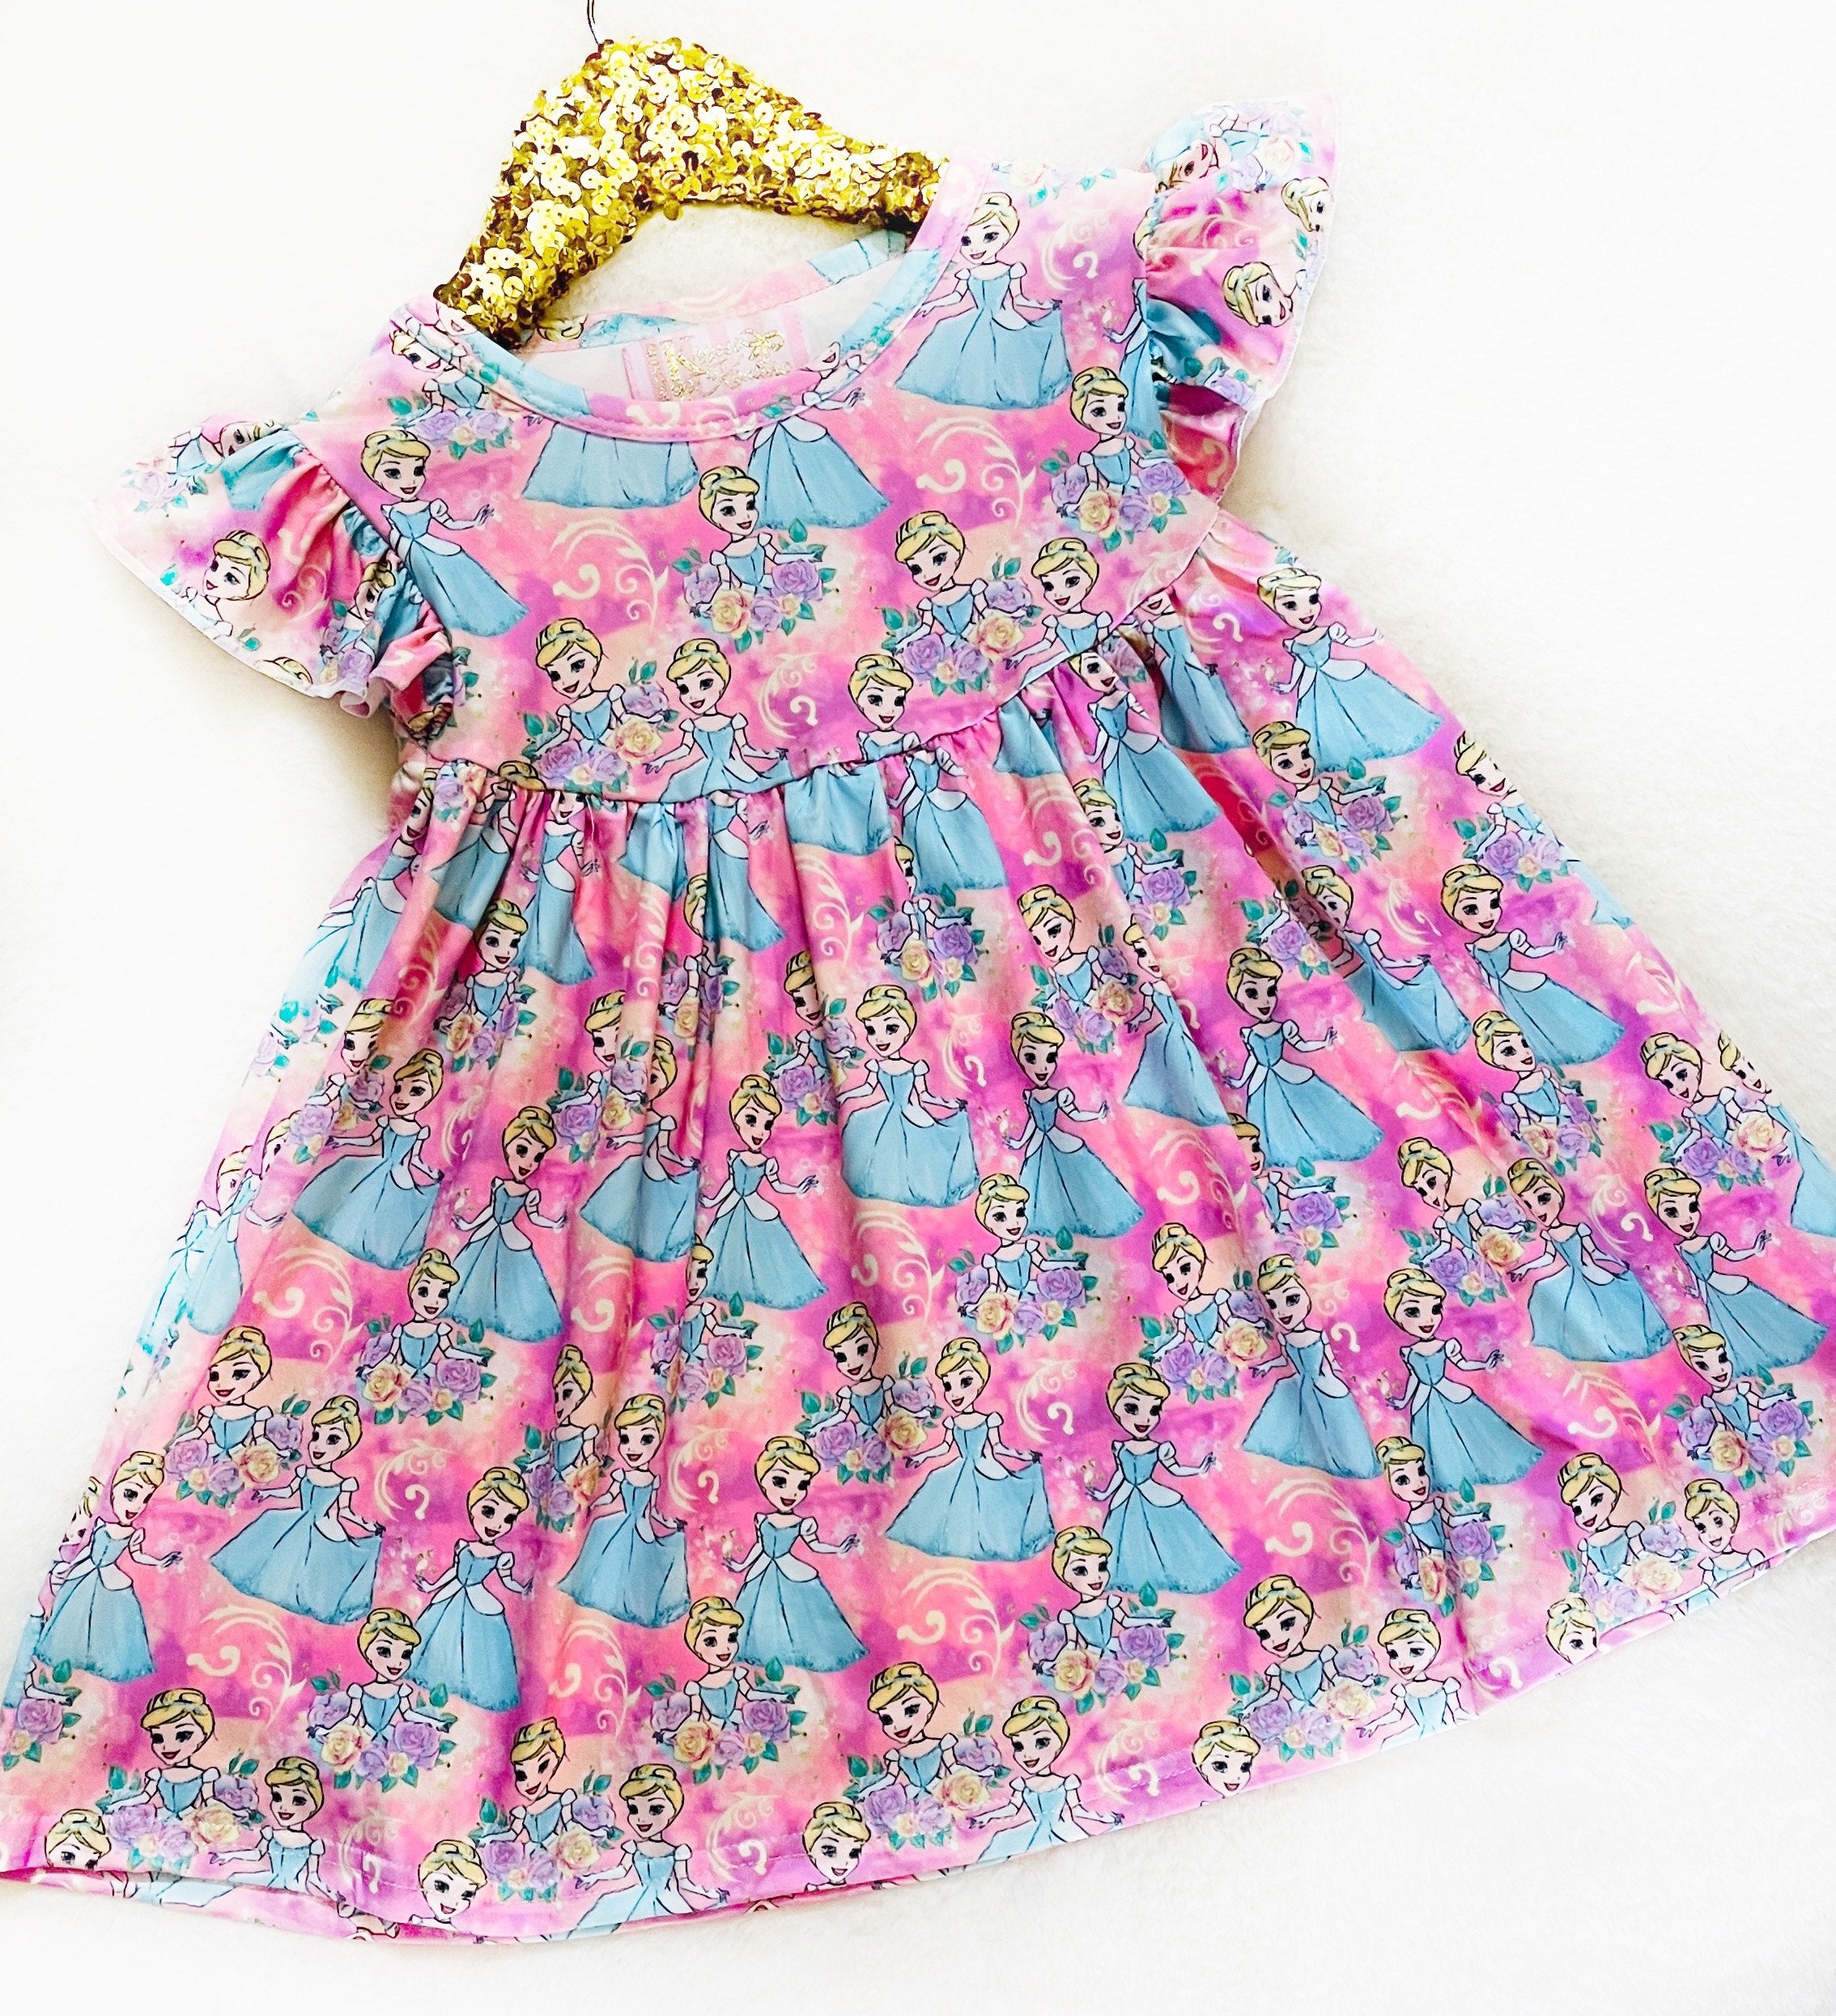 Girls Fun Character Dresses - Pink Cinderella with peach & purple roses